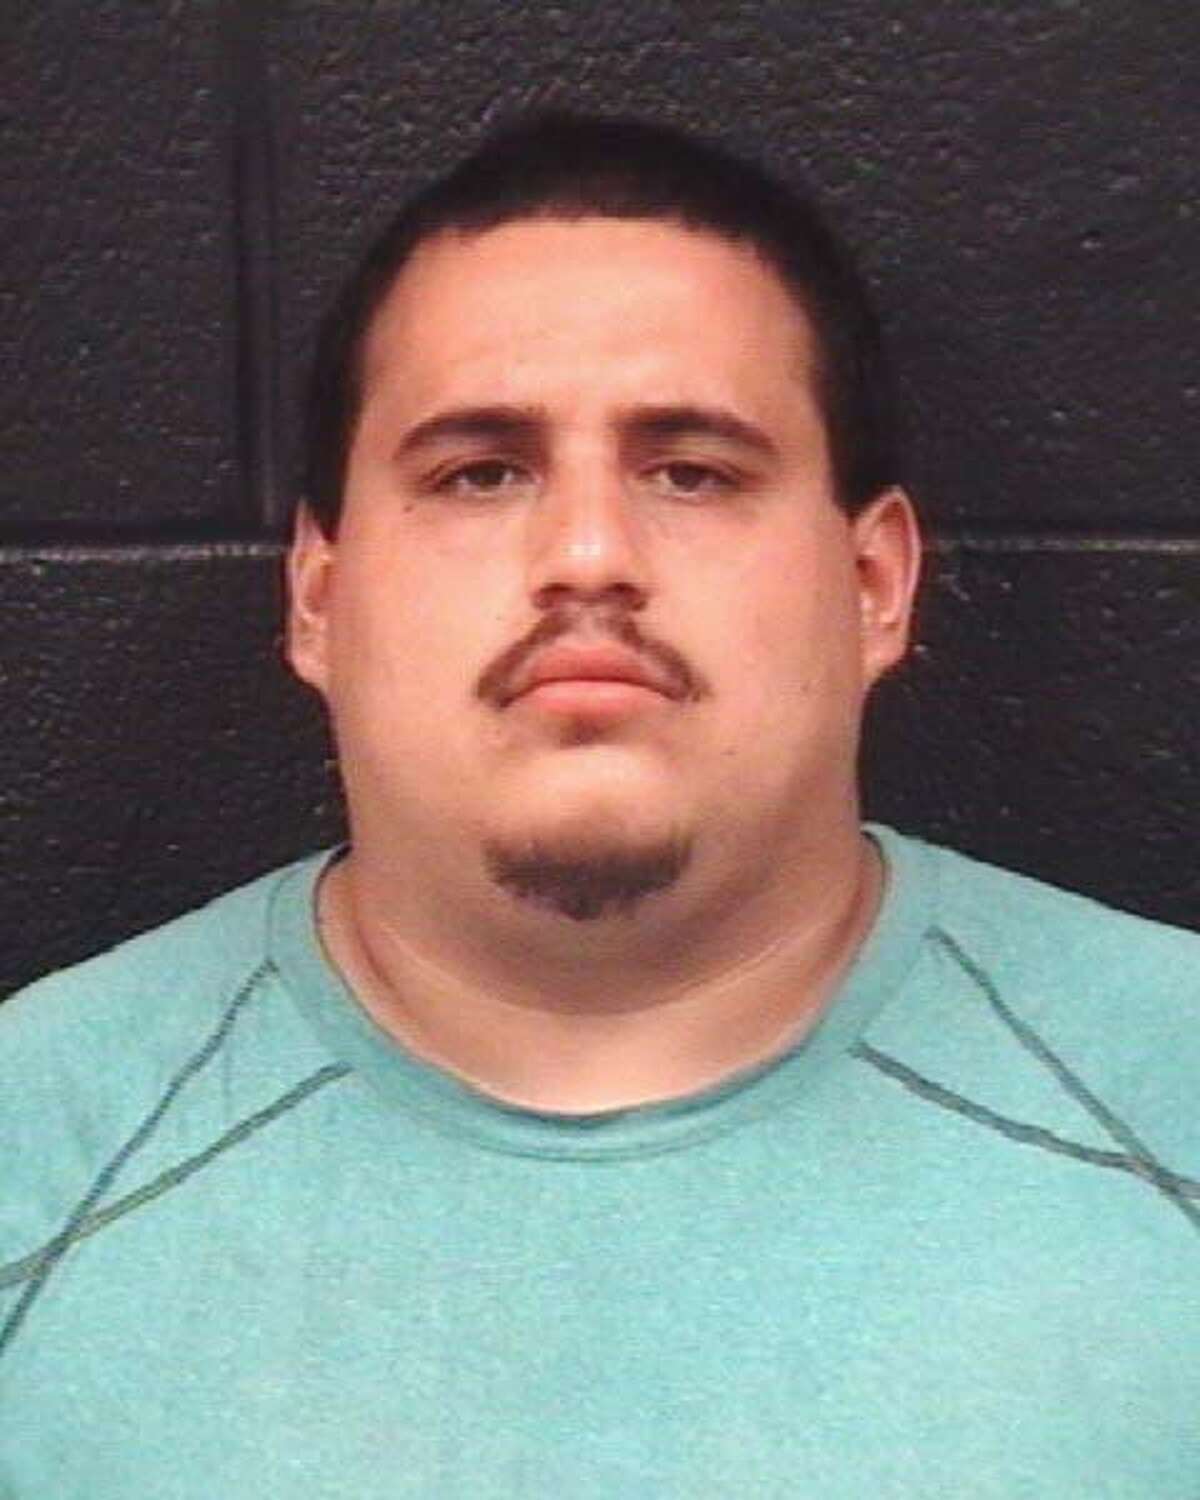 Mario Angel Gonzalez, 24, was arrested on a murder charge by Laredo police late Saturday.